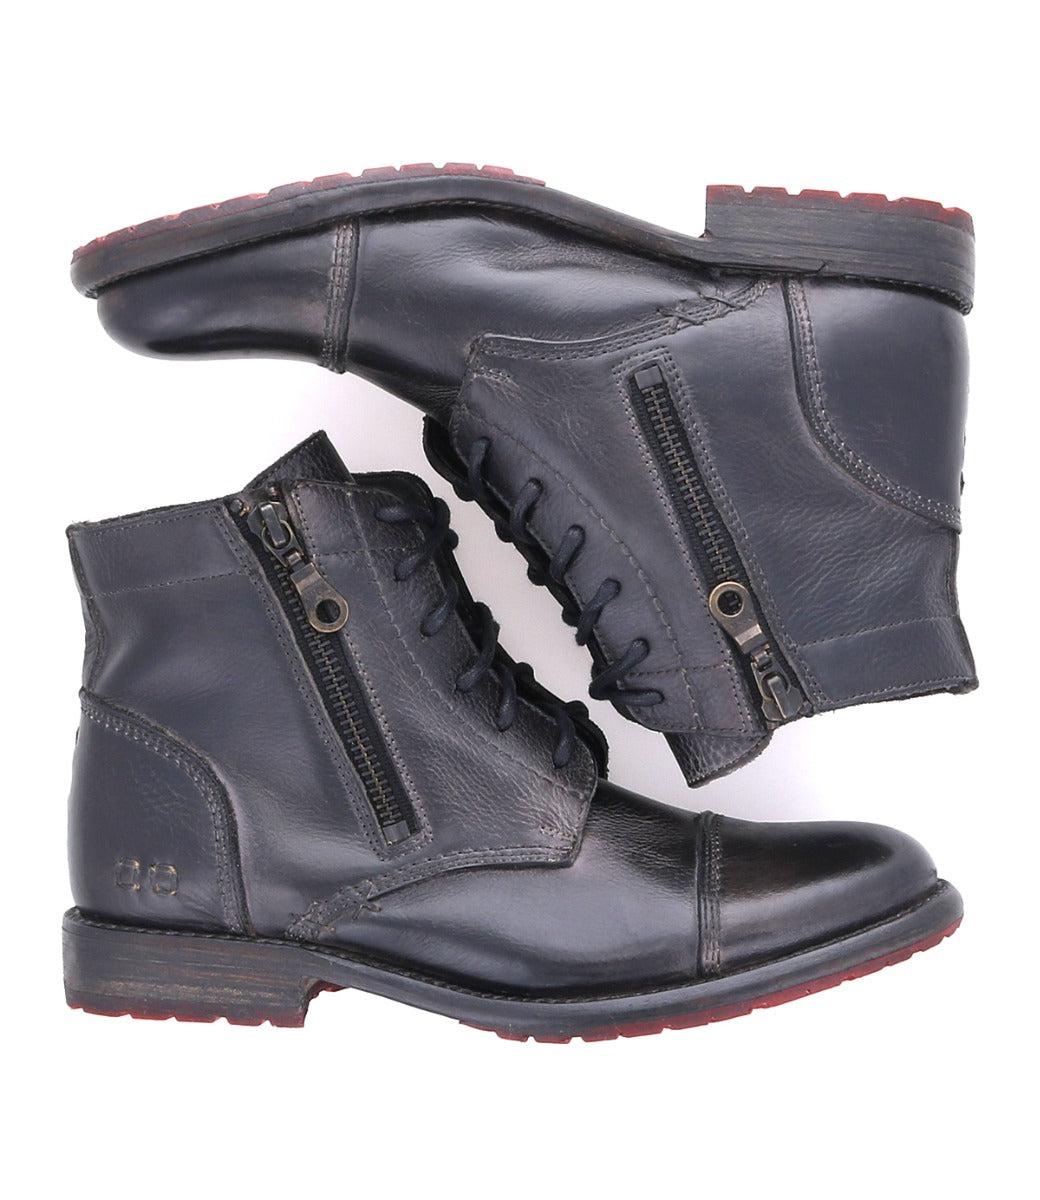 A pair of Bed Stu Bonnie II women's black leather boots with zippers.